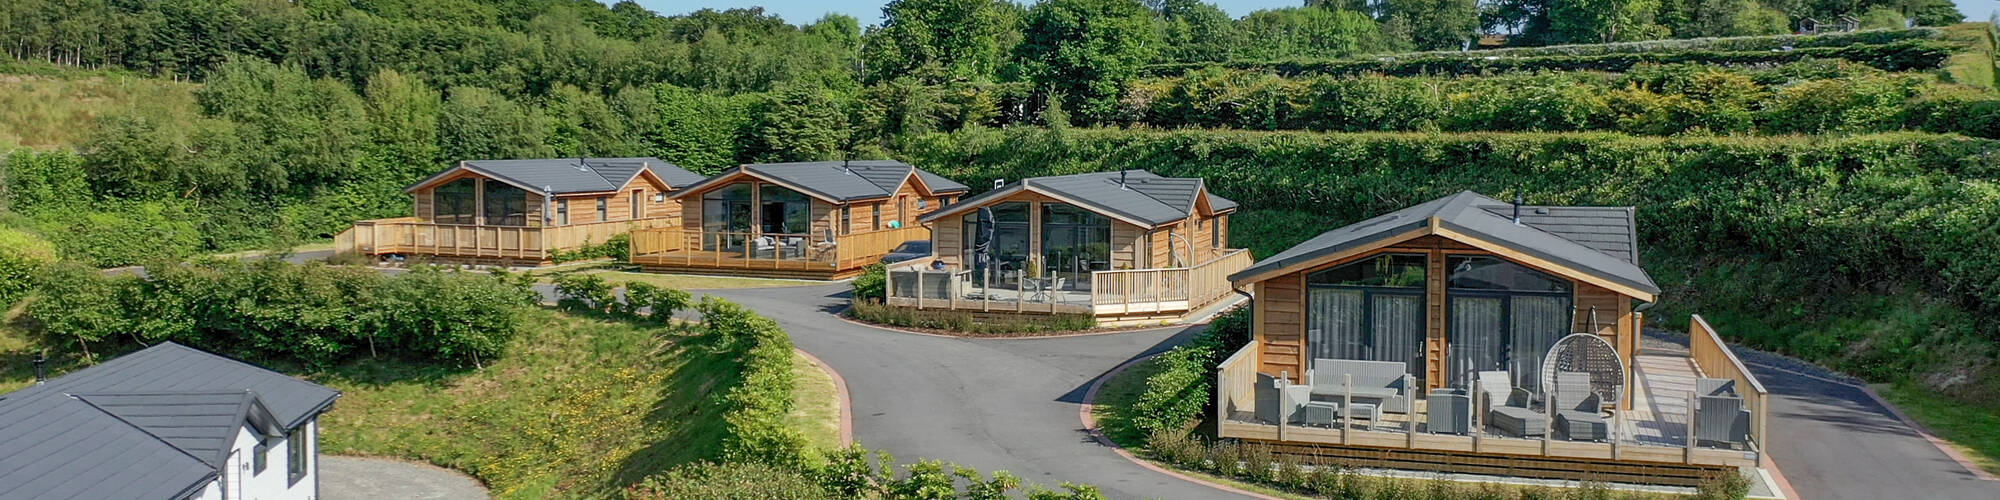 Lodges Overview